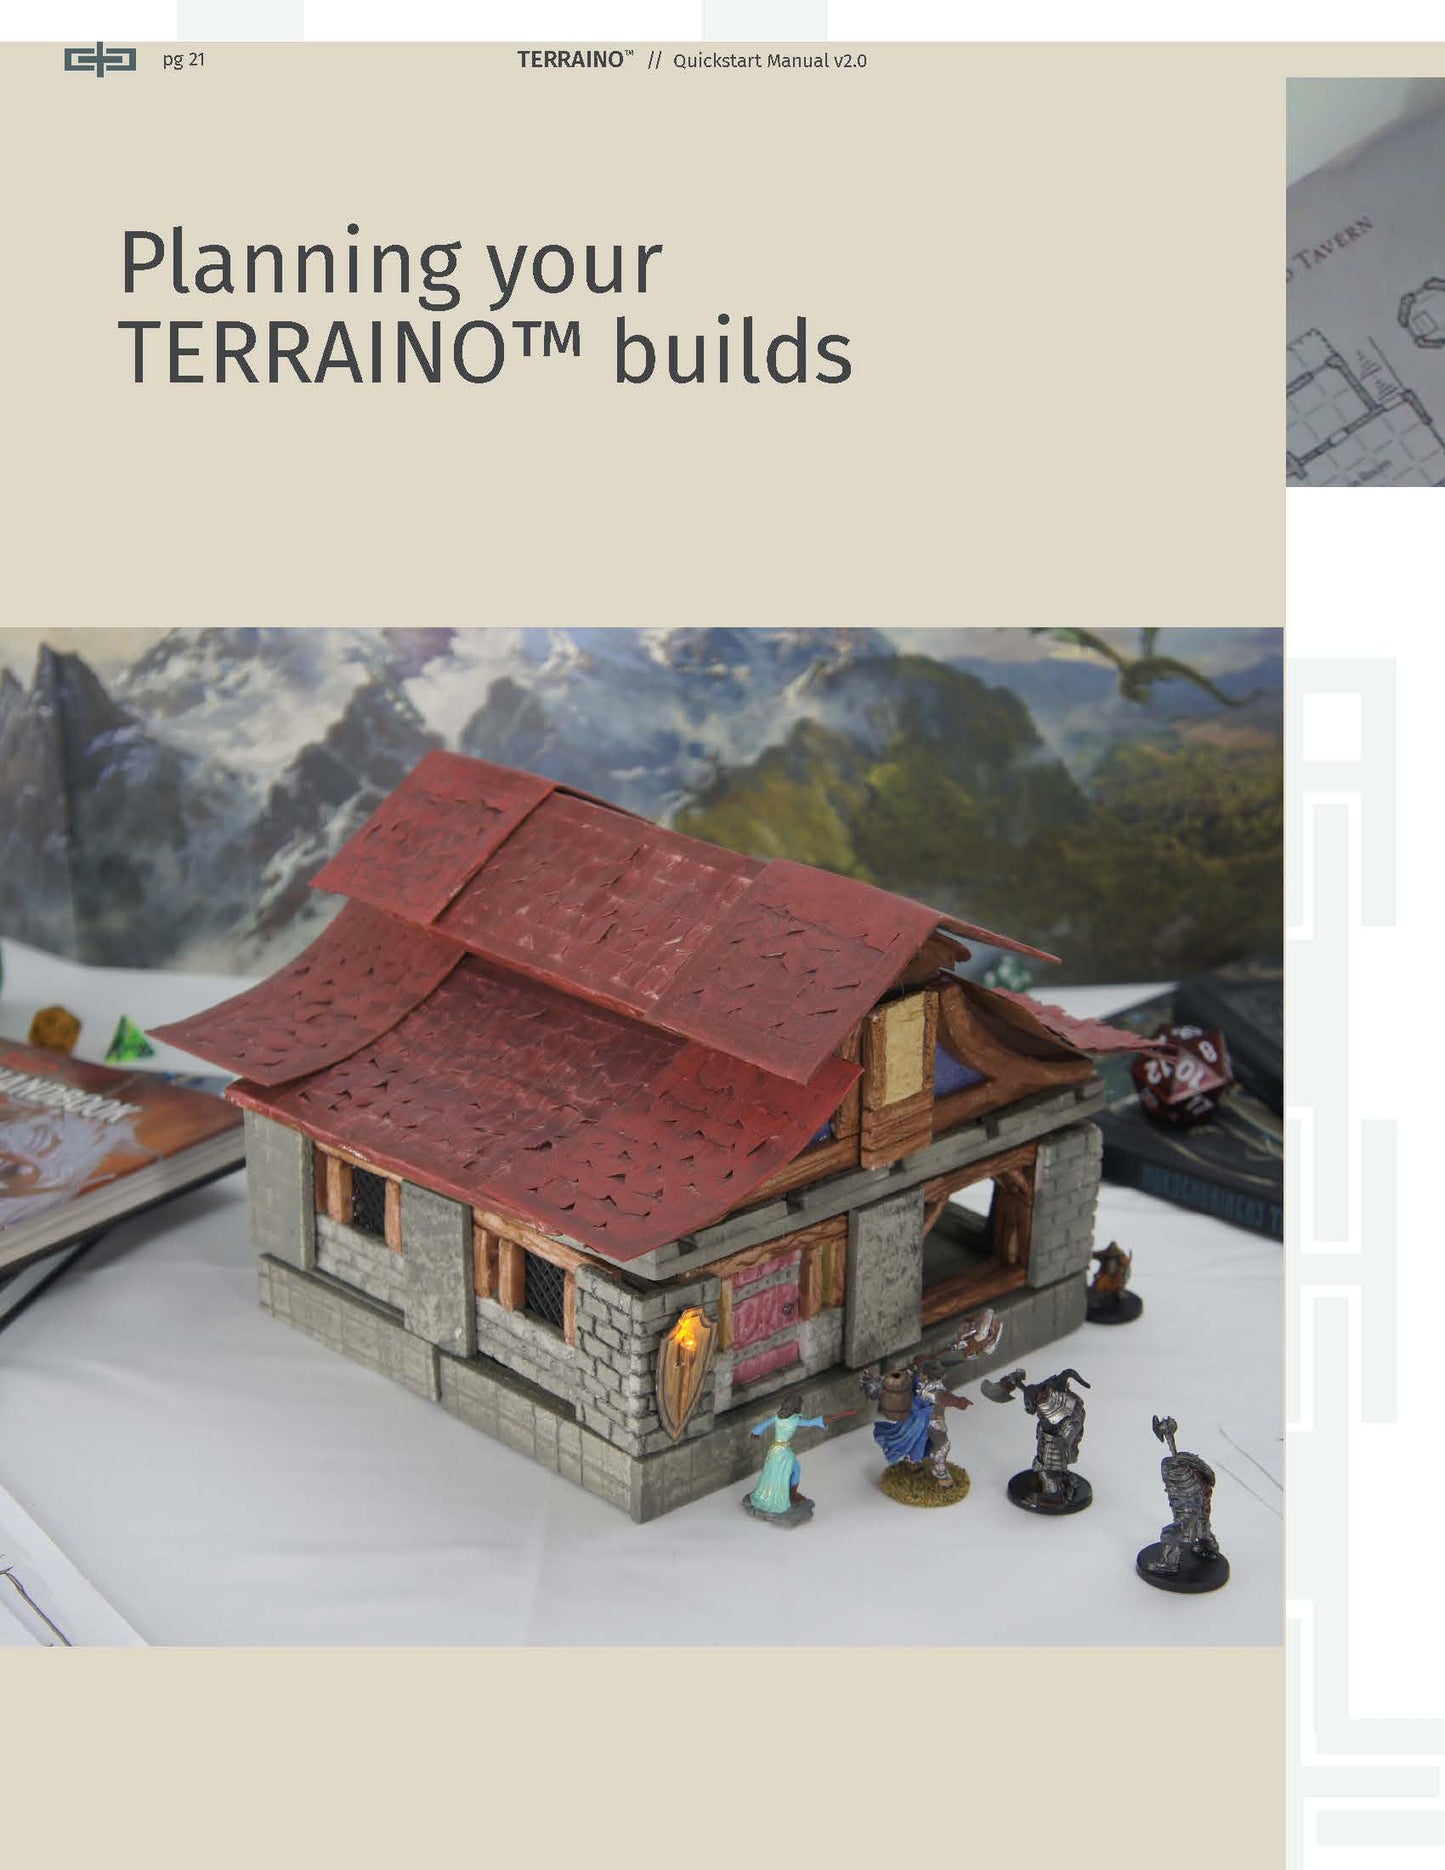 Save time and unneeded work by planning your your TERRAINO tabletop terrain builds.